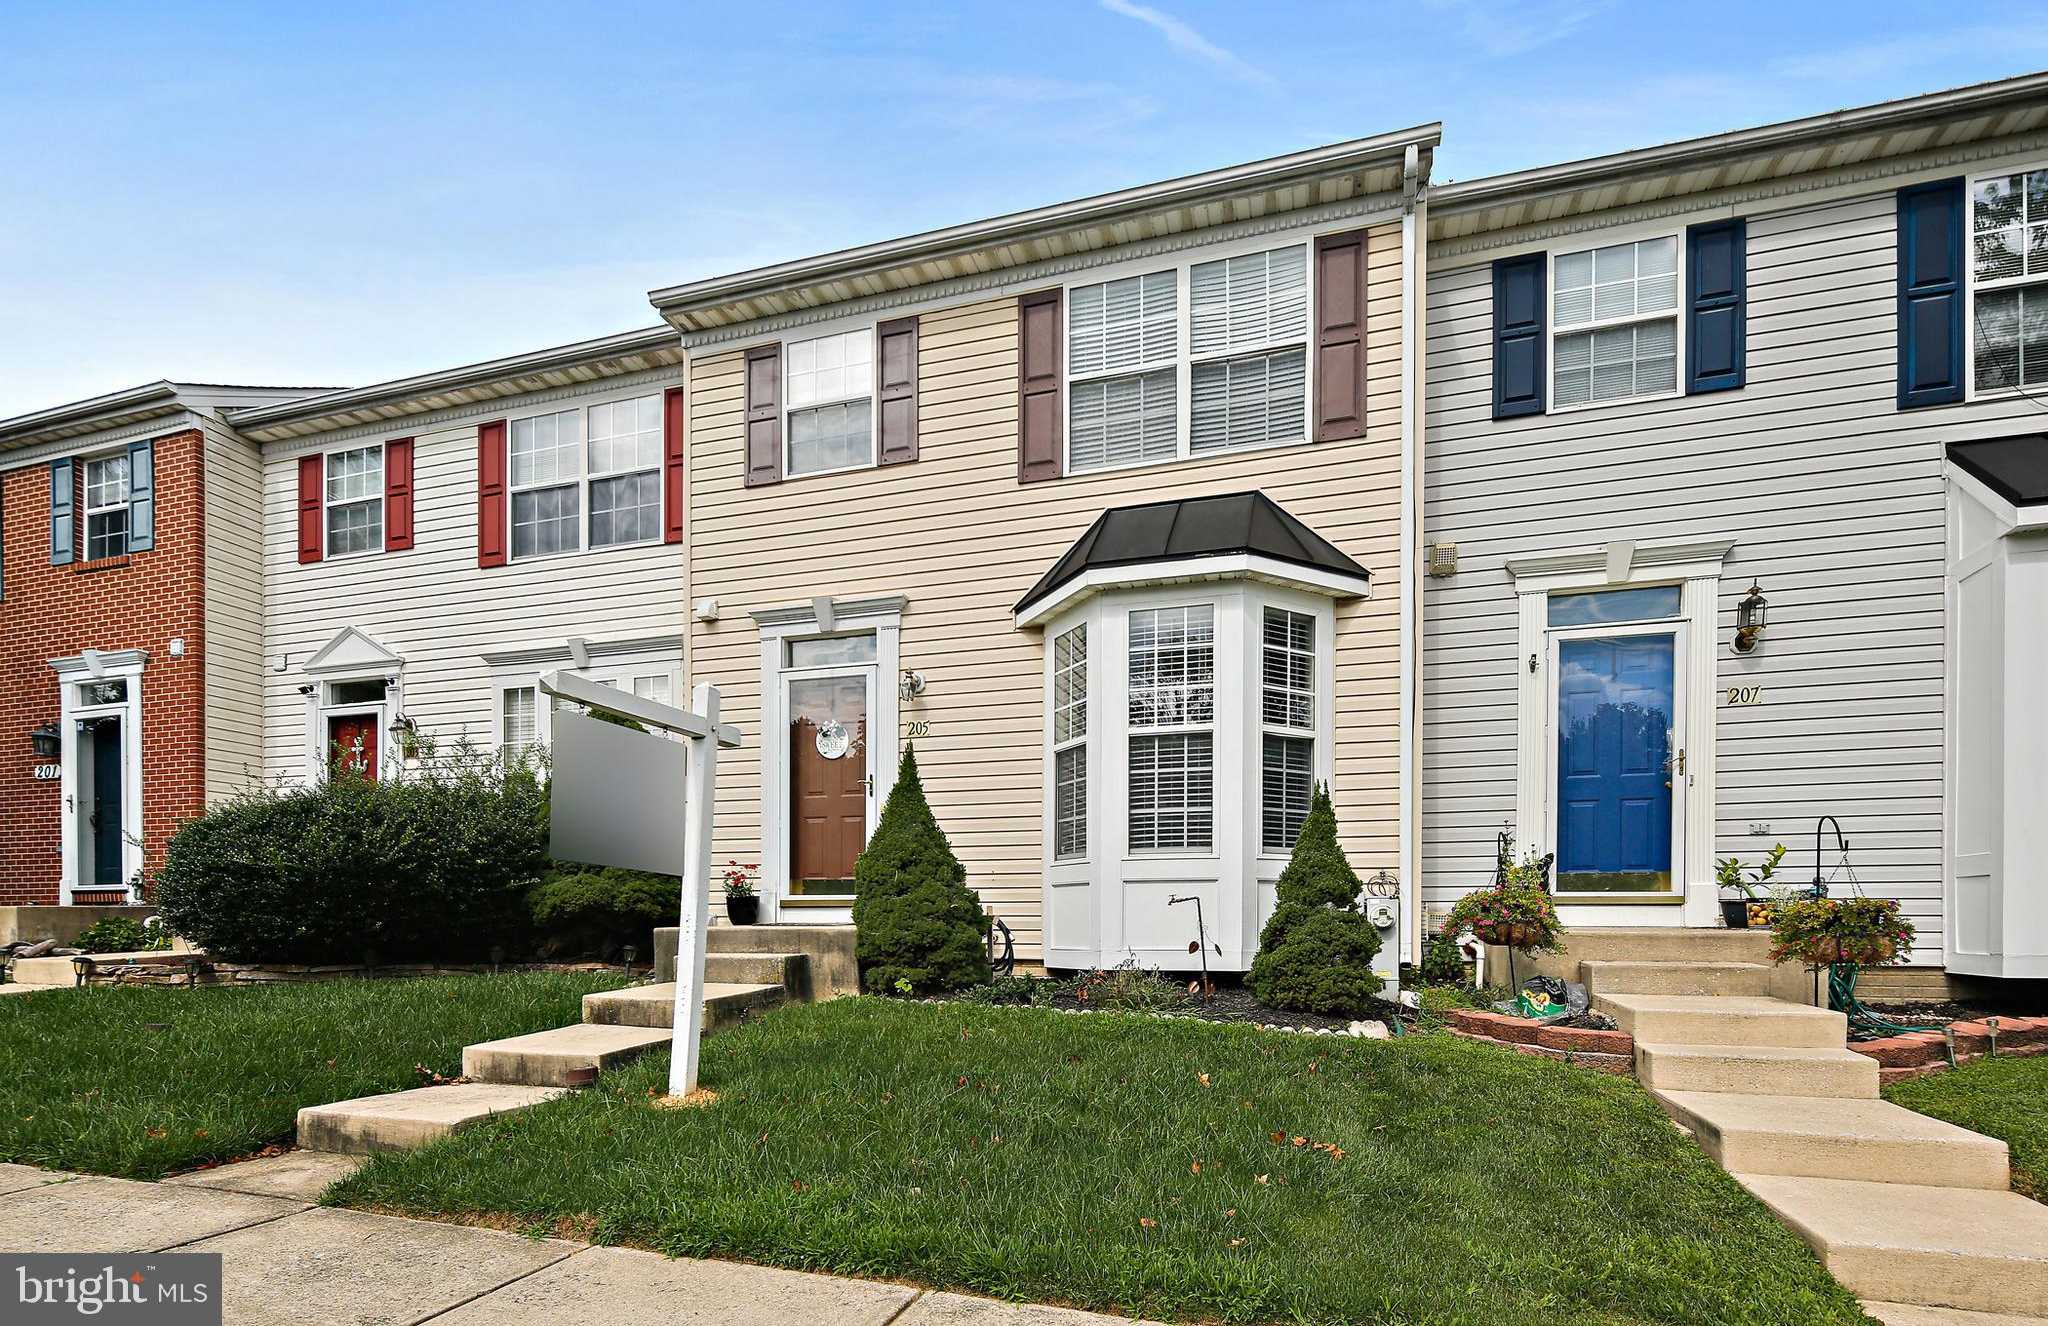 View REISTERSTOWN, MD 21136 townhome